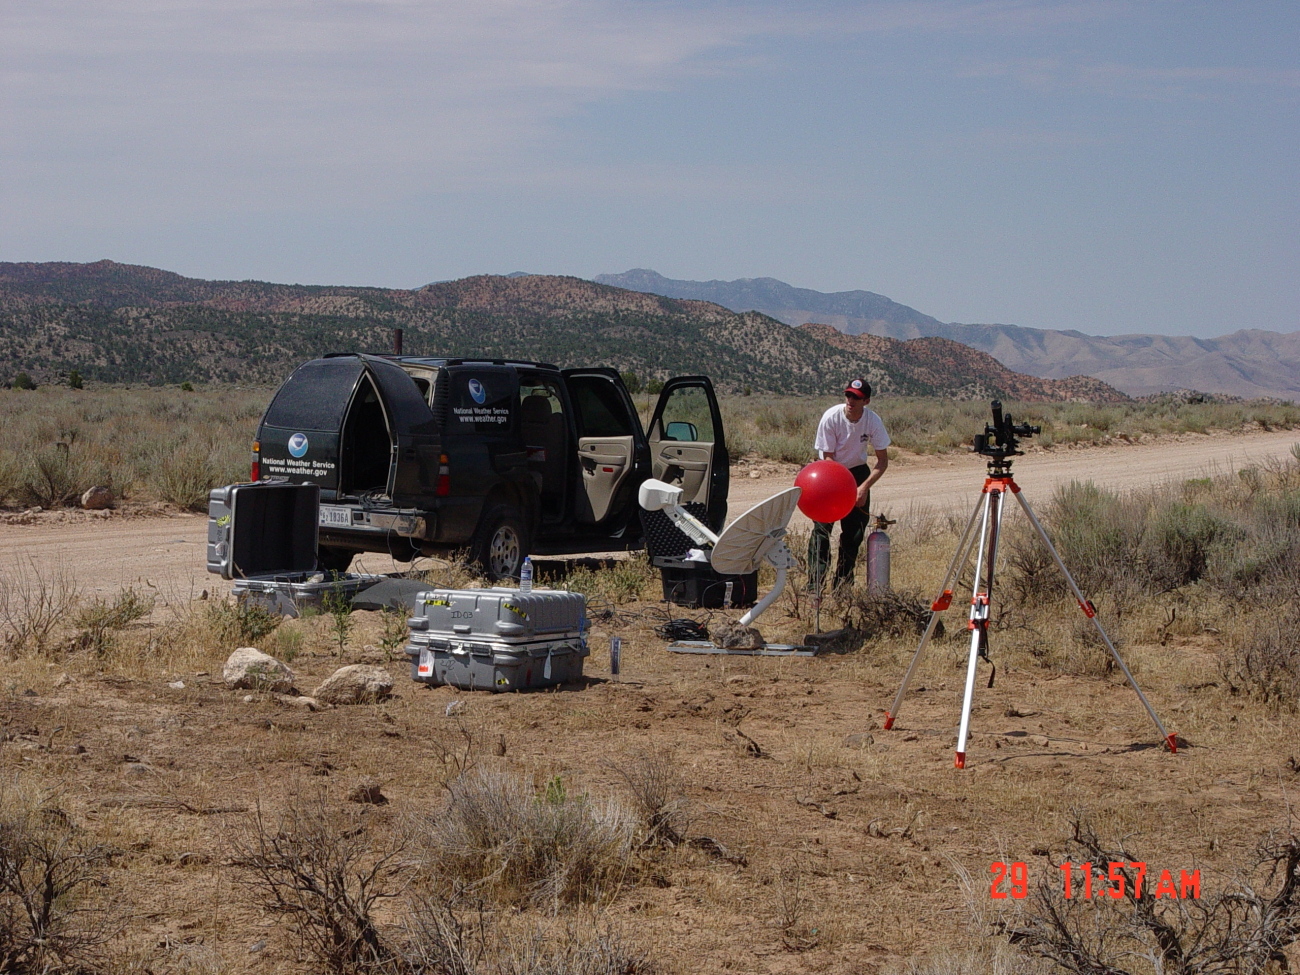 Incident Meteorologist Chris Jordan prepares a PIBAL for launch tomonitor winds on the Reilly Fire in southern Utah